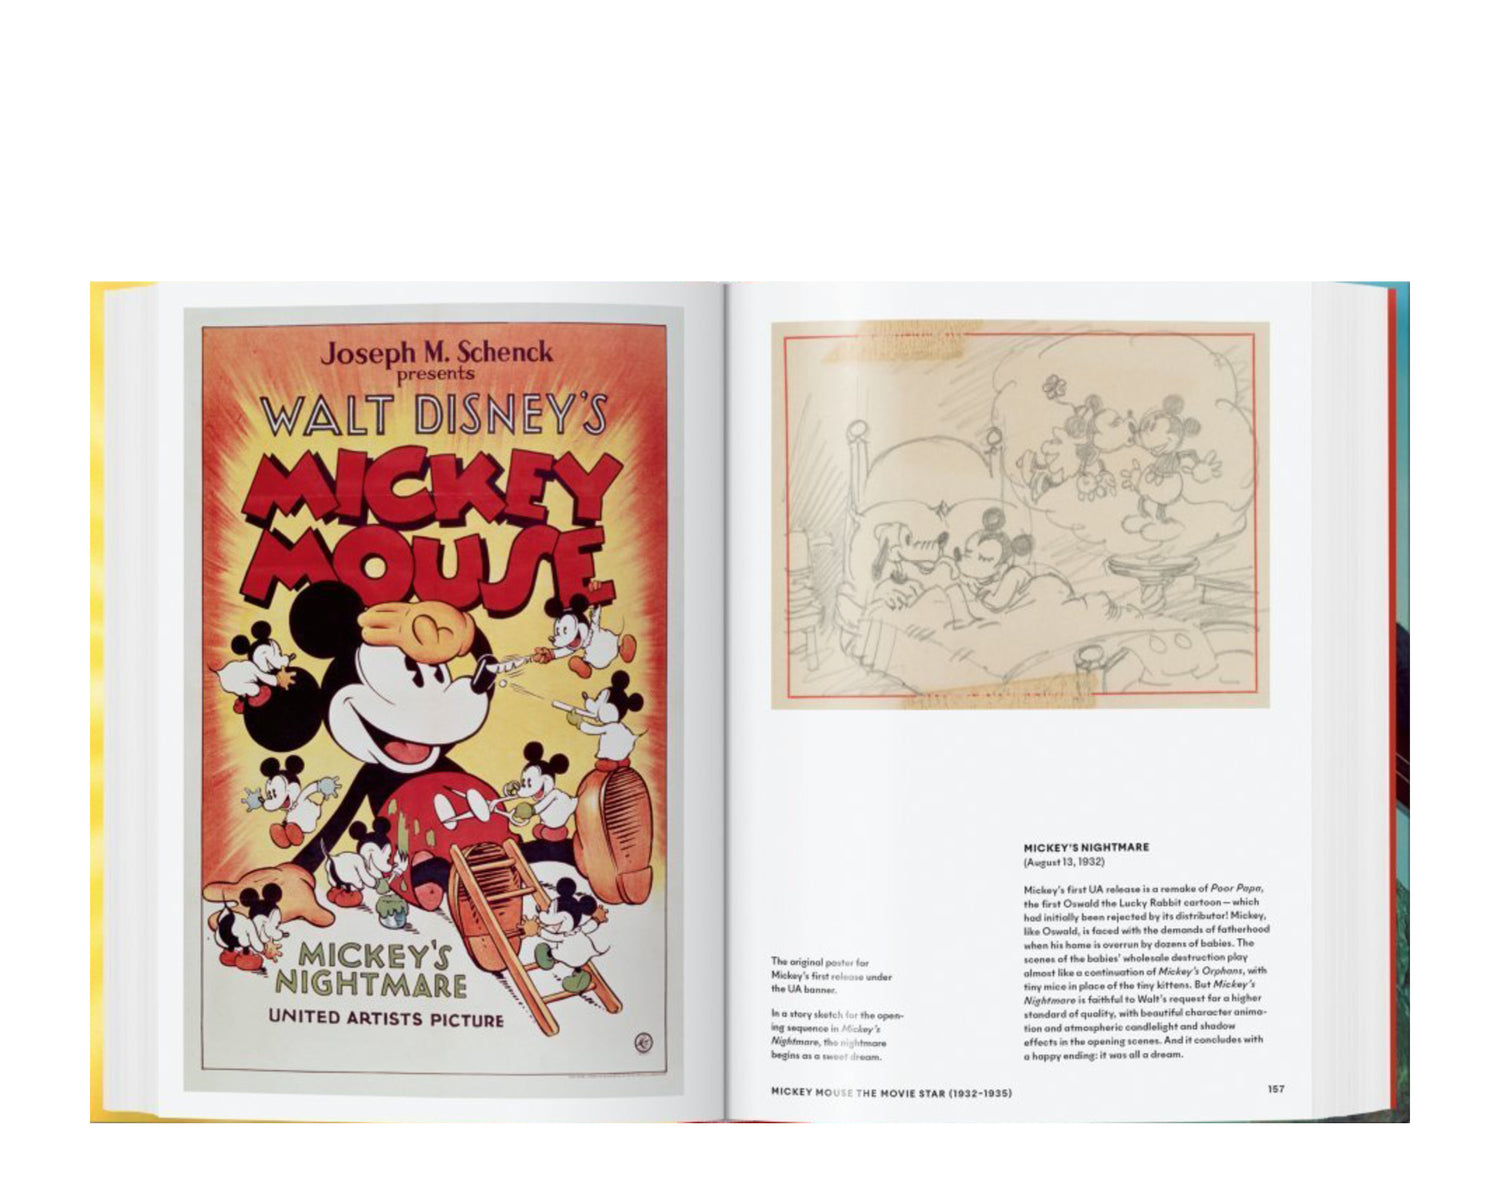 Taschen Books - Walt Disney's Mickey Mouse - The Ultimate History - 40th Anniversary Edition Hardcover Book